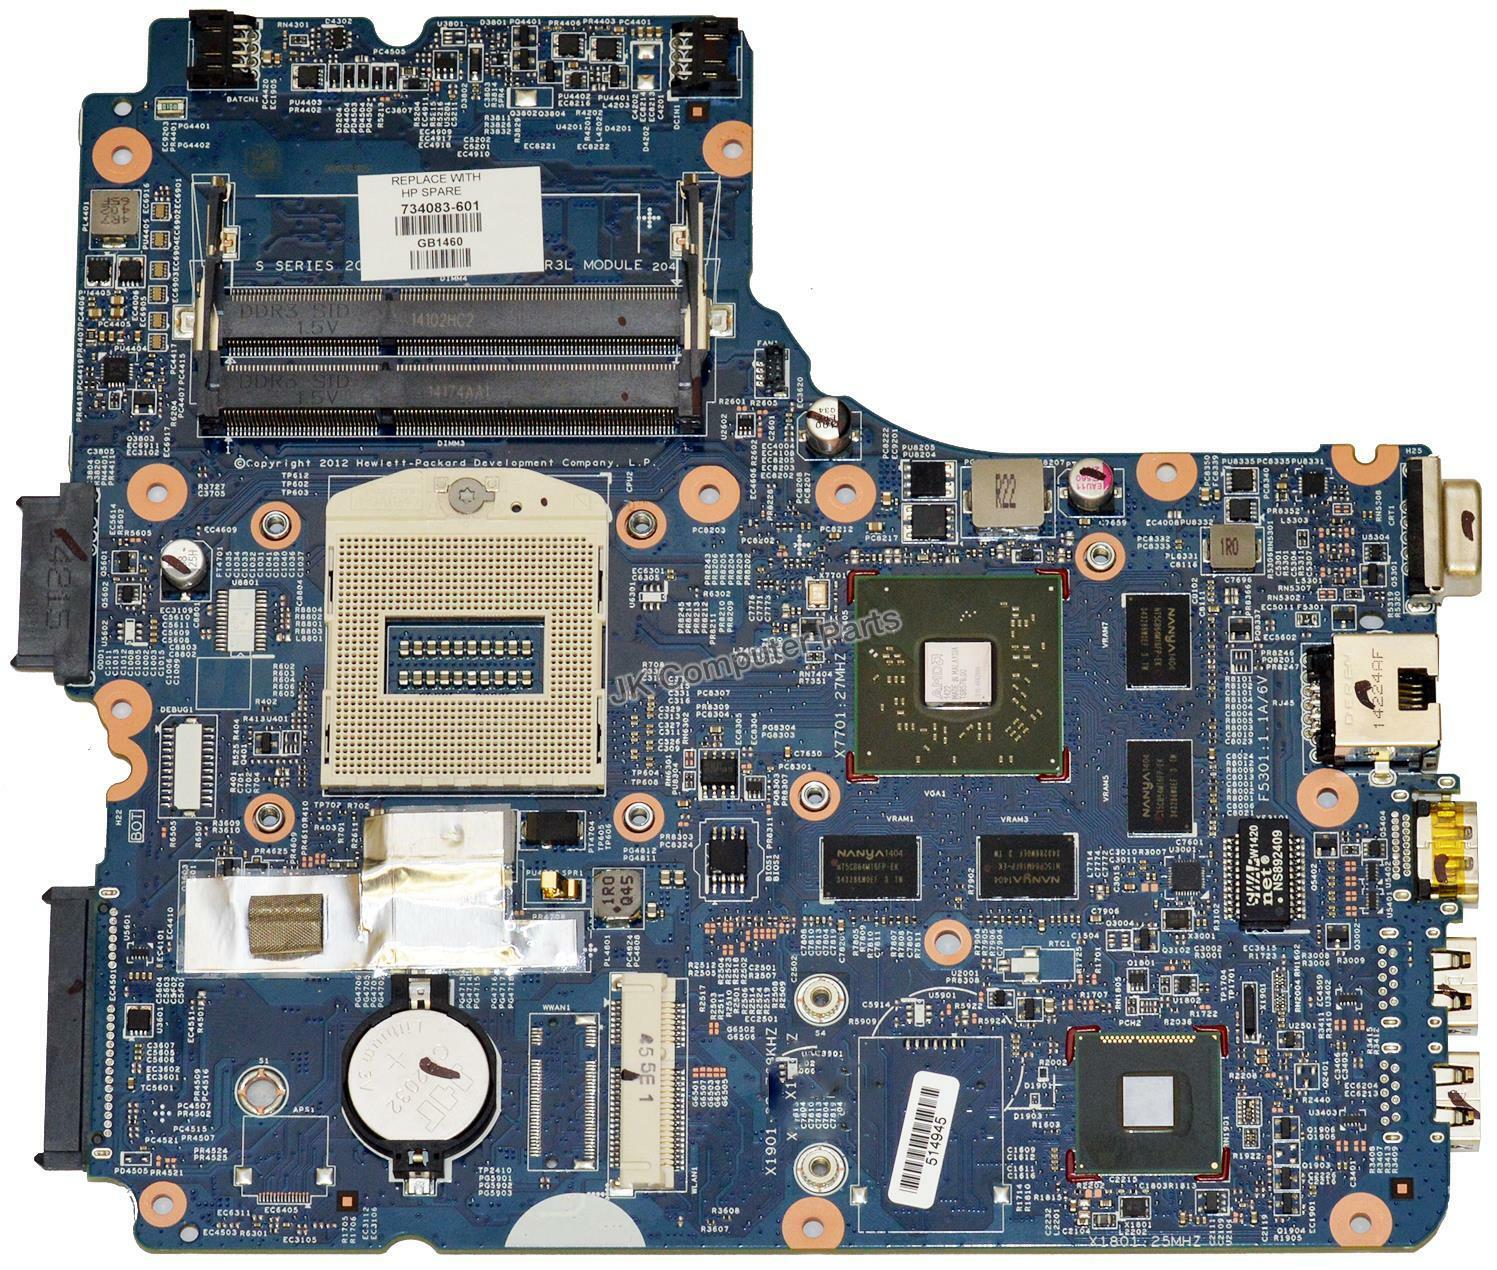 HP ProBook 450 Intel Laptop Motherboard s947 Rampage_MB 12241-1 734083-601 This motherboard is pulled from